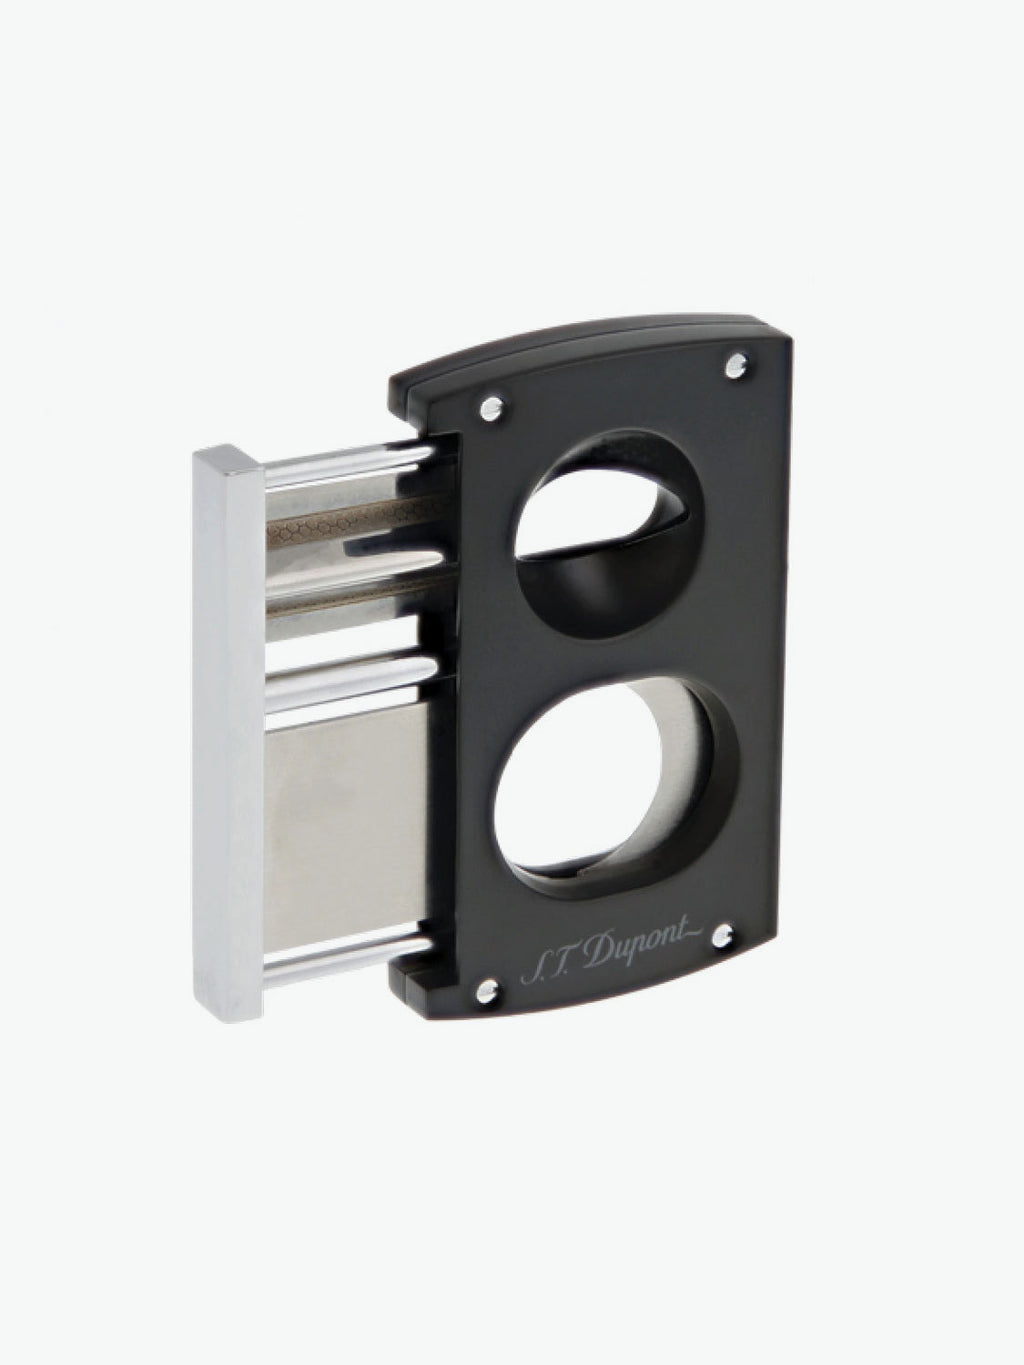 S.T. Dupont Double Blade Cigar Cutter Black | A